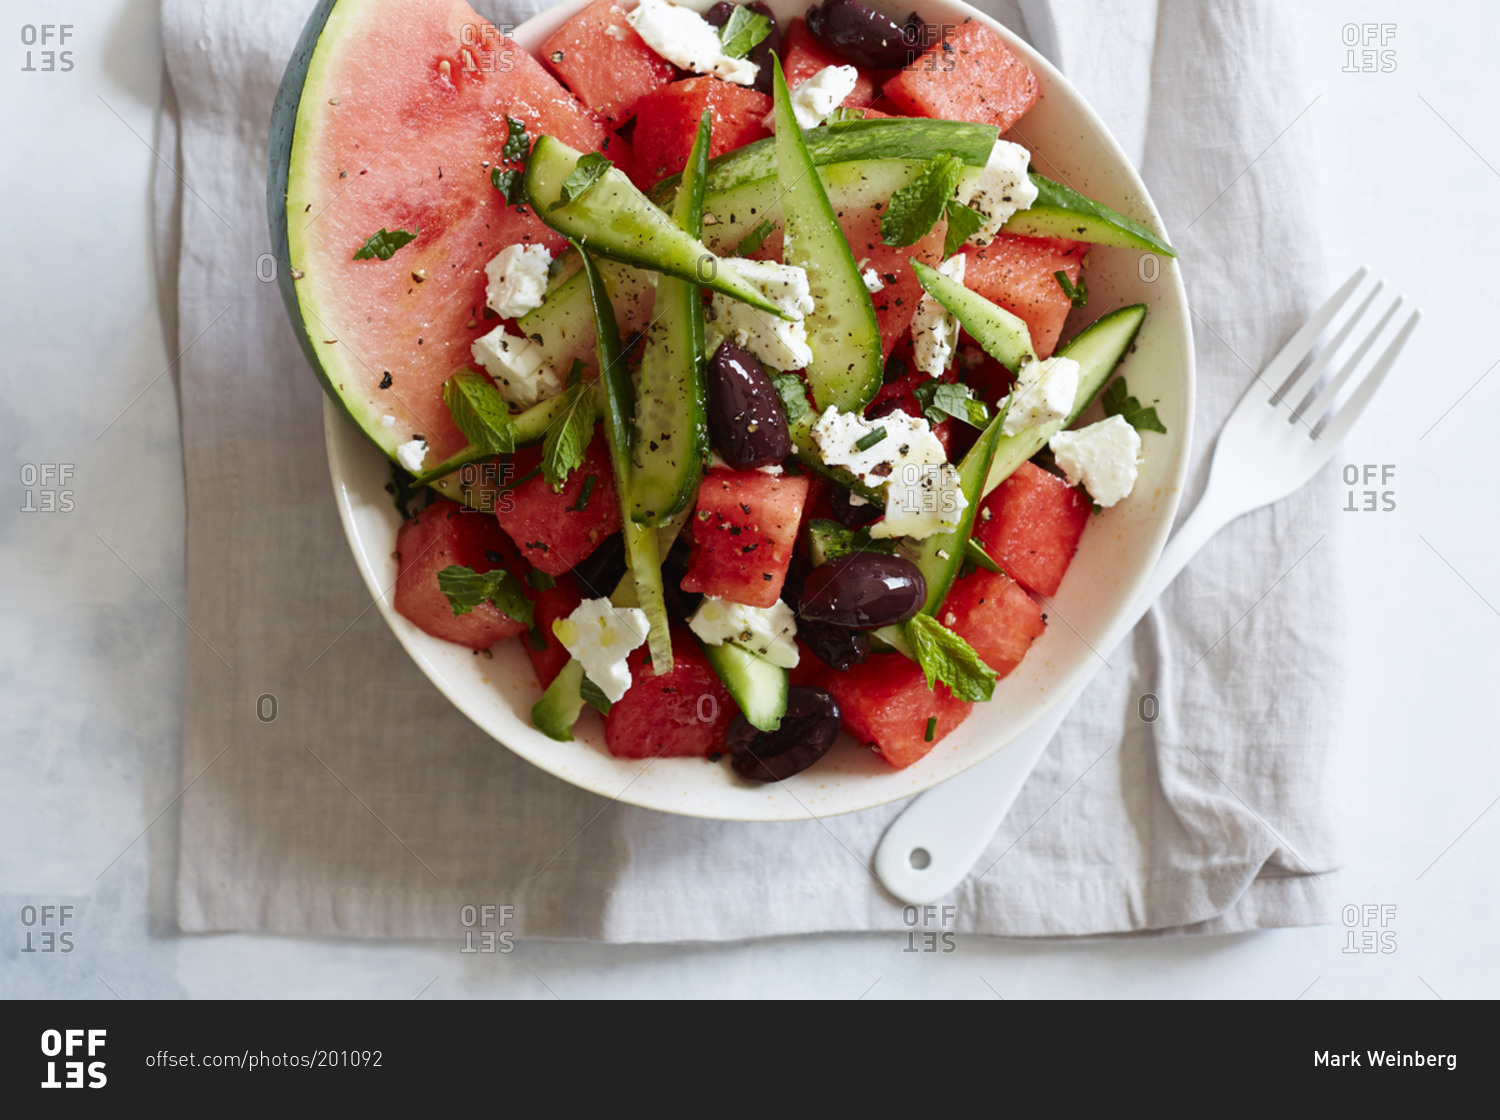 Watermelon salad with veggies and beans